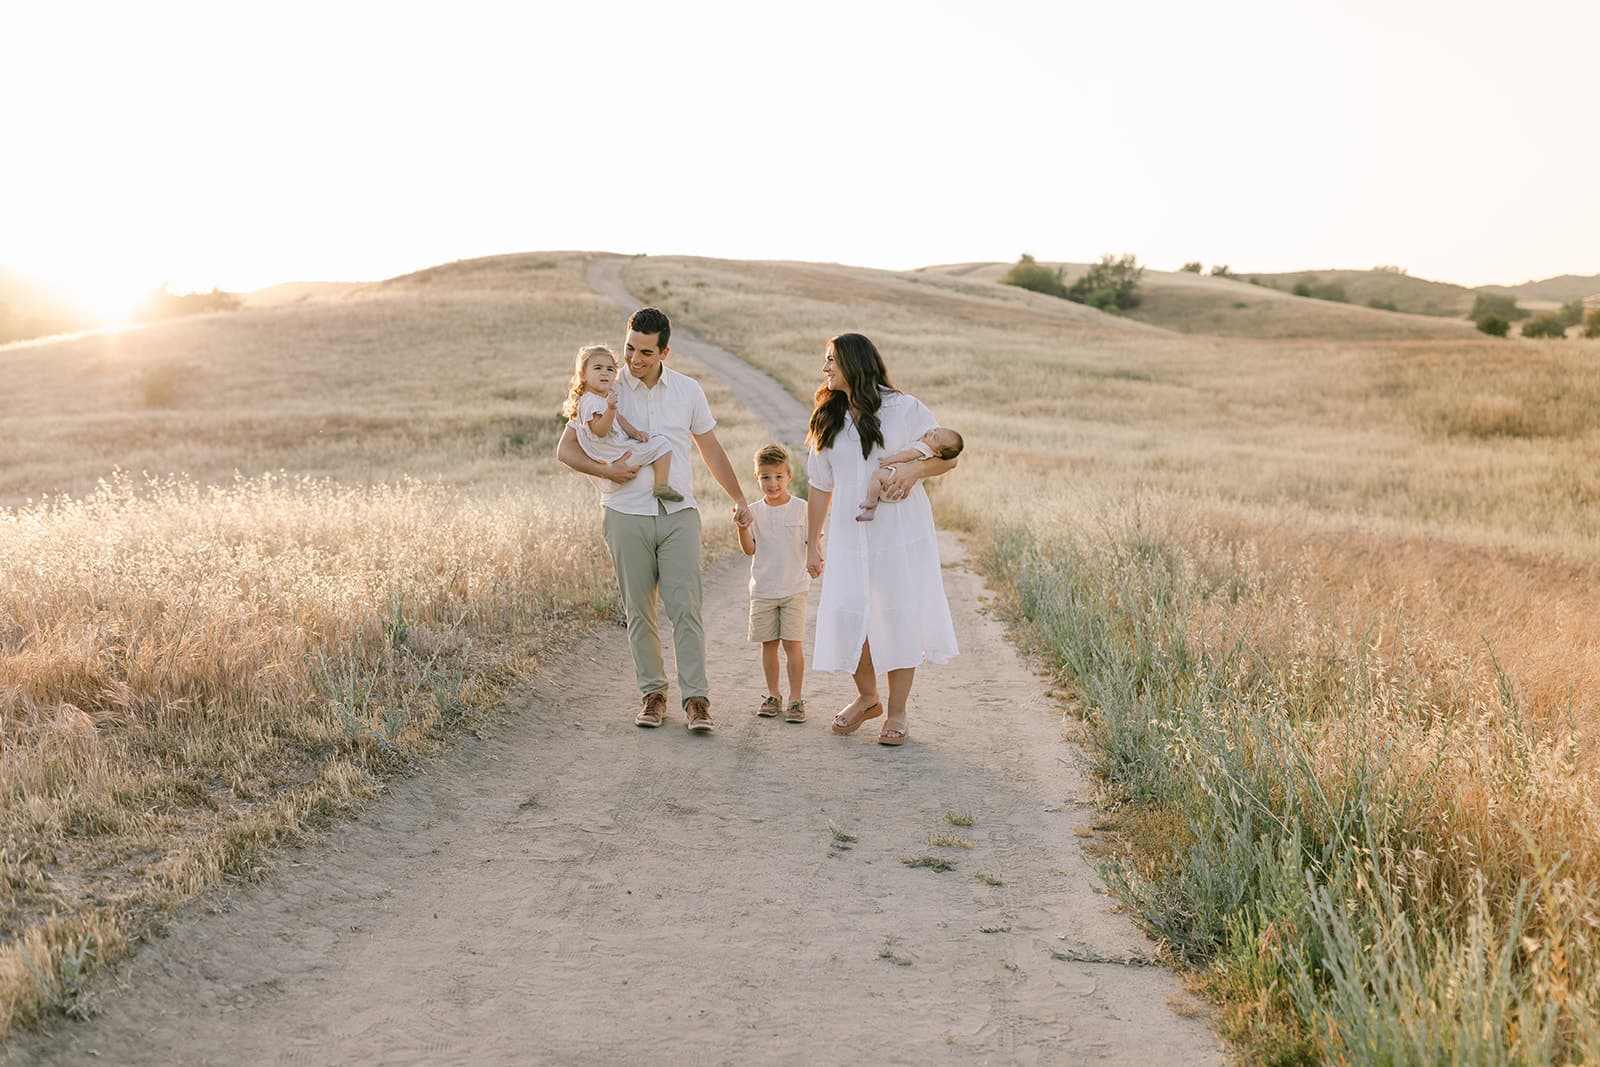 A mom and dad carry their newborn baby and toddler daughter while walking and holding hands with their toddler son in a field trail at sunset